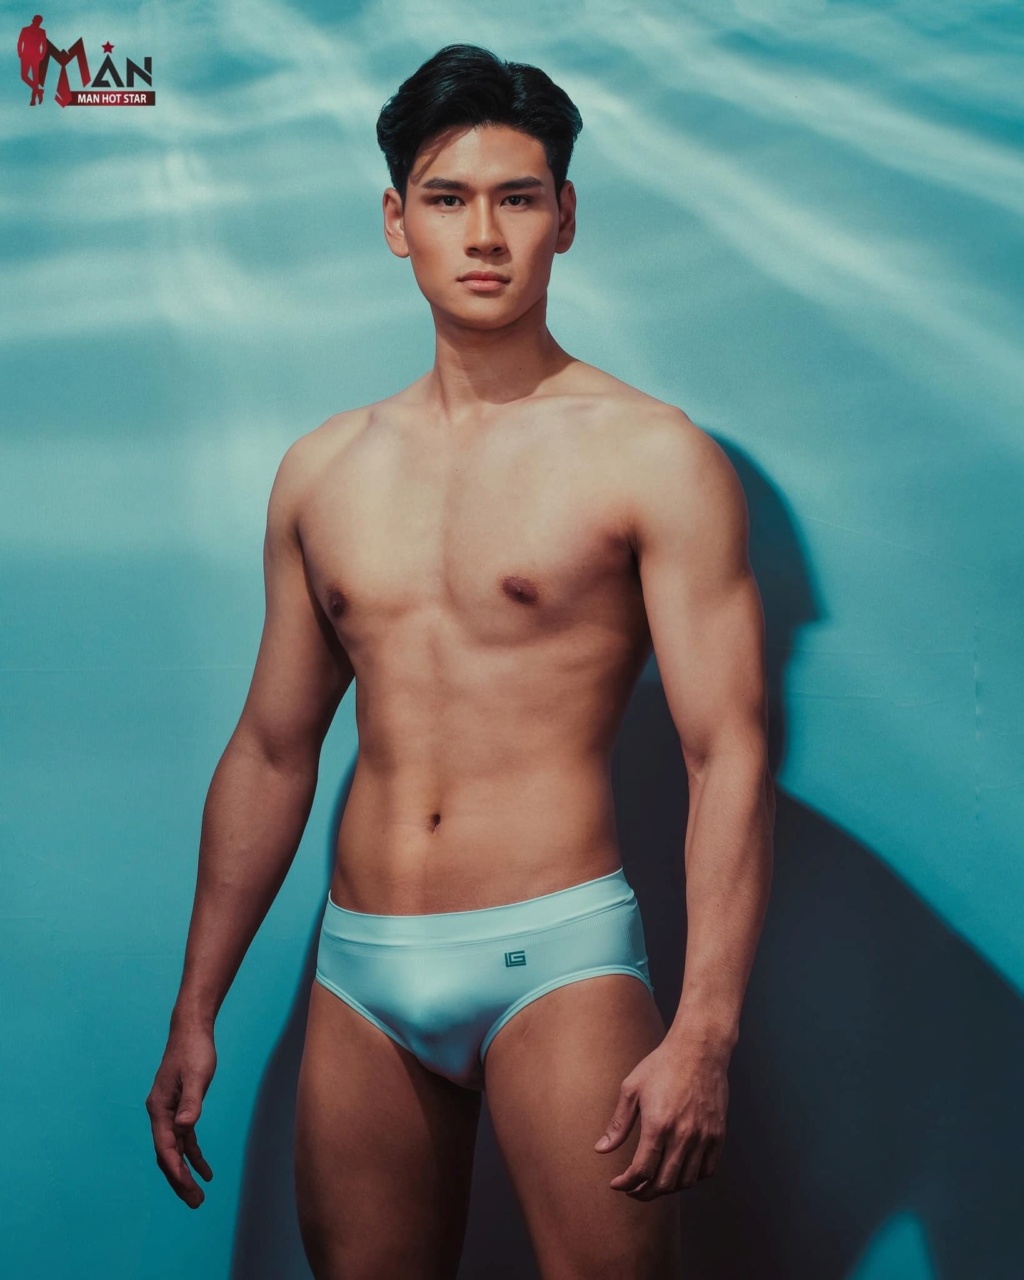 Man Hot Star International 2022 is Jovy Bequillo of the Philippines' 31571511